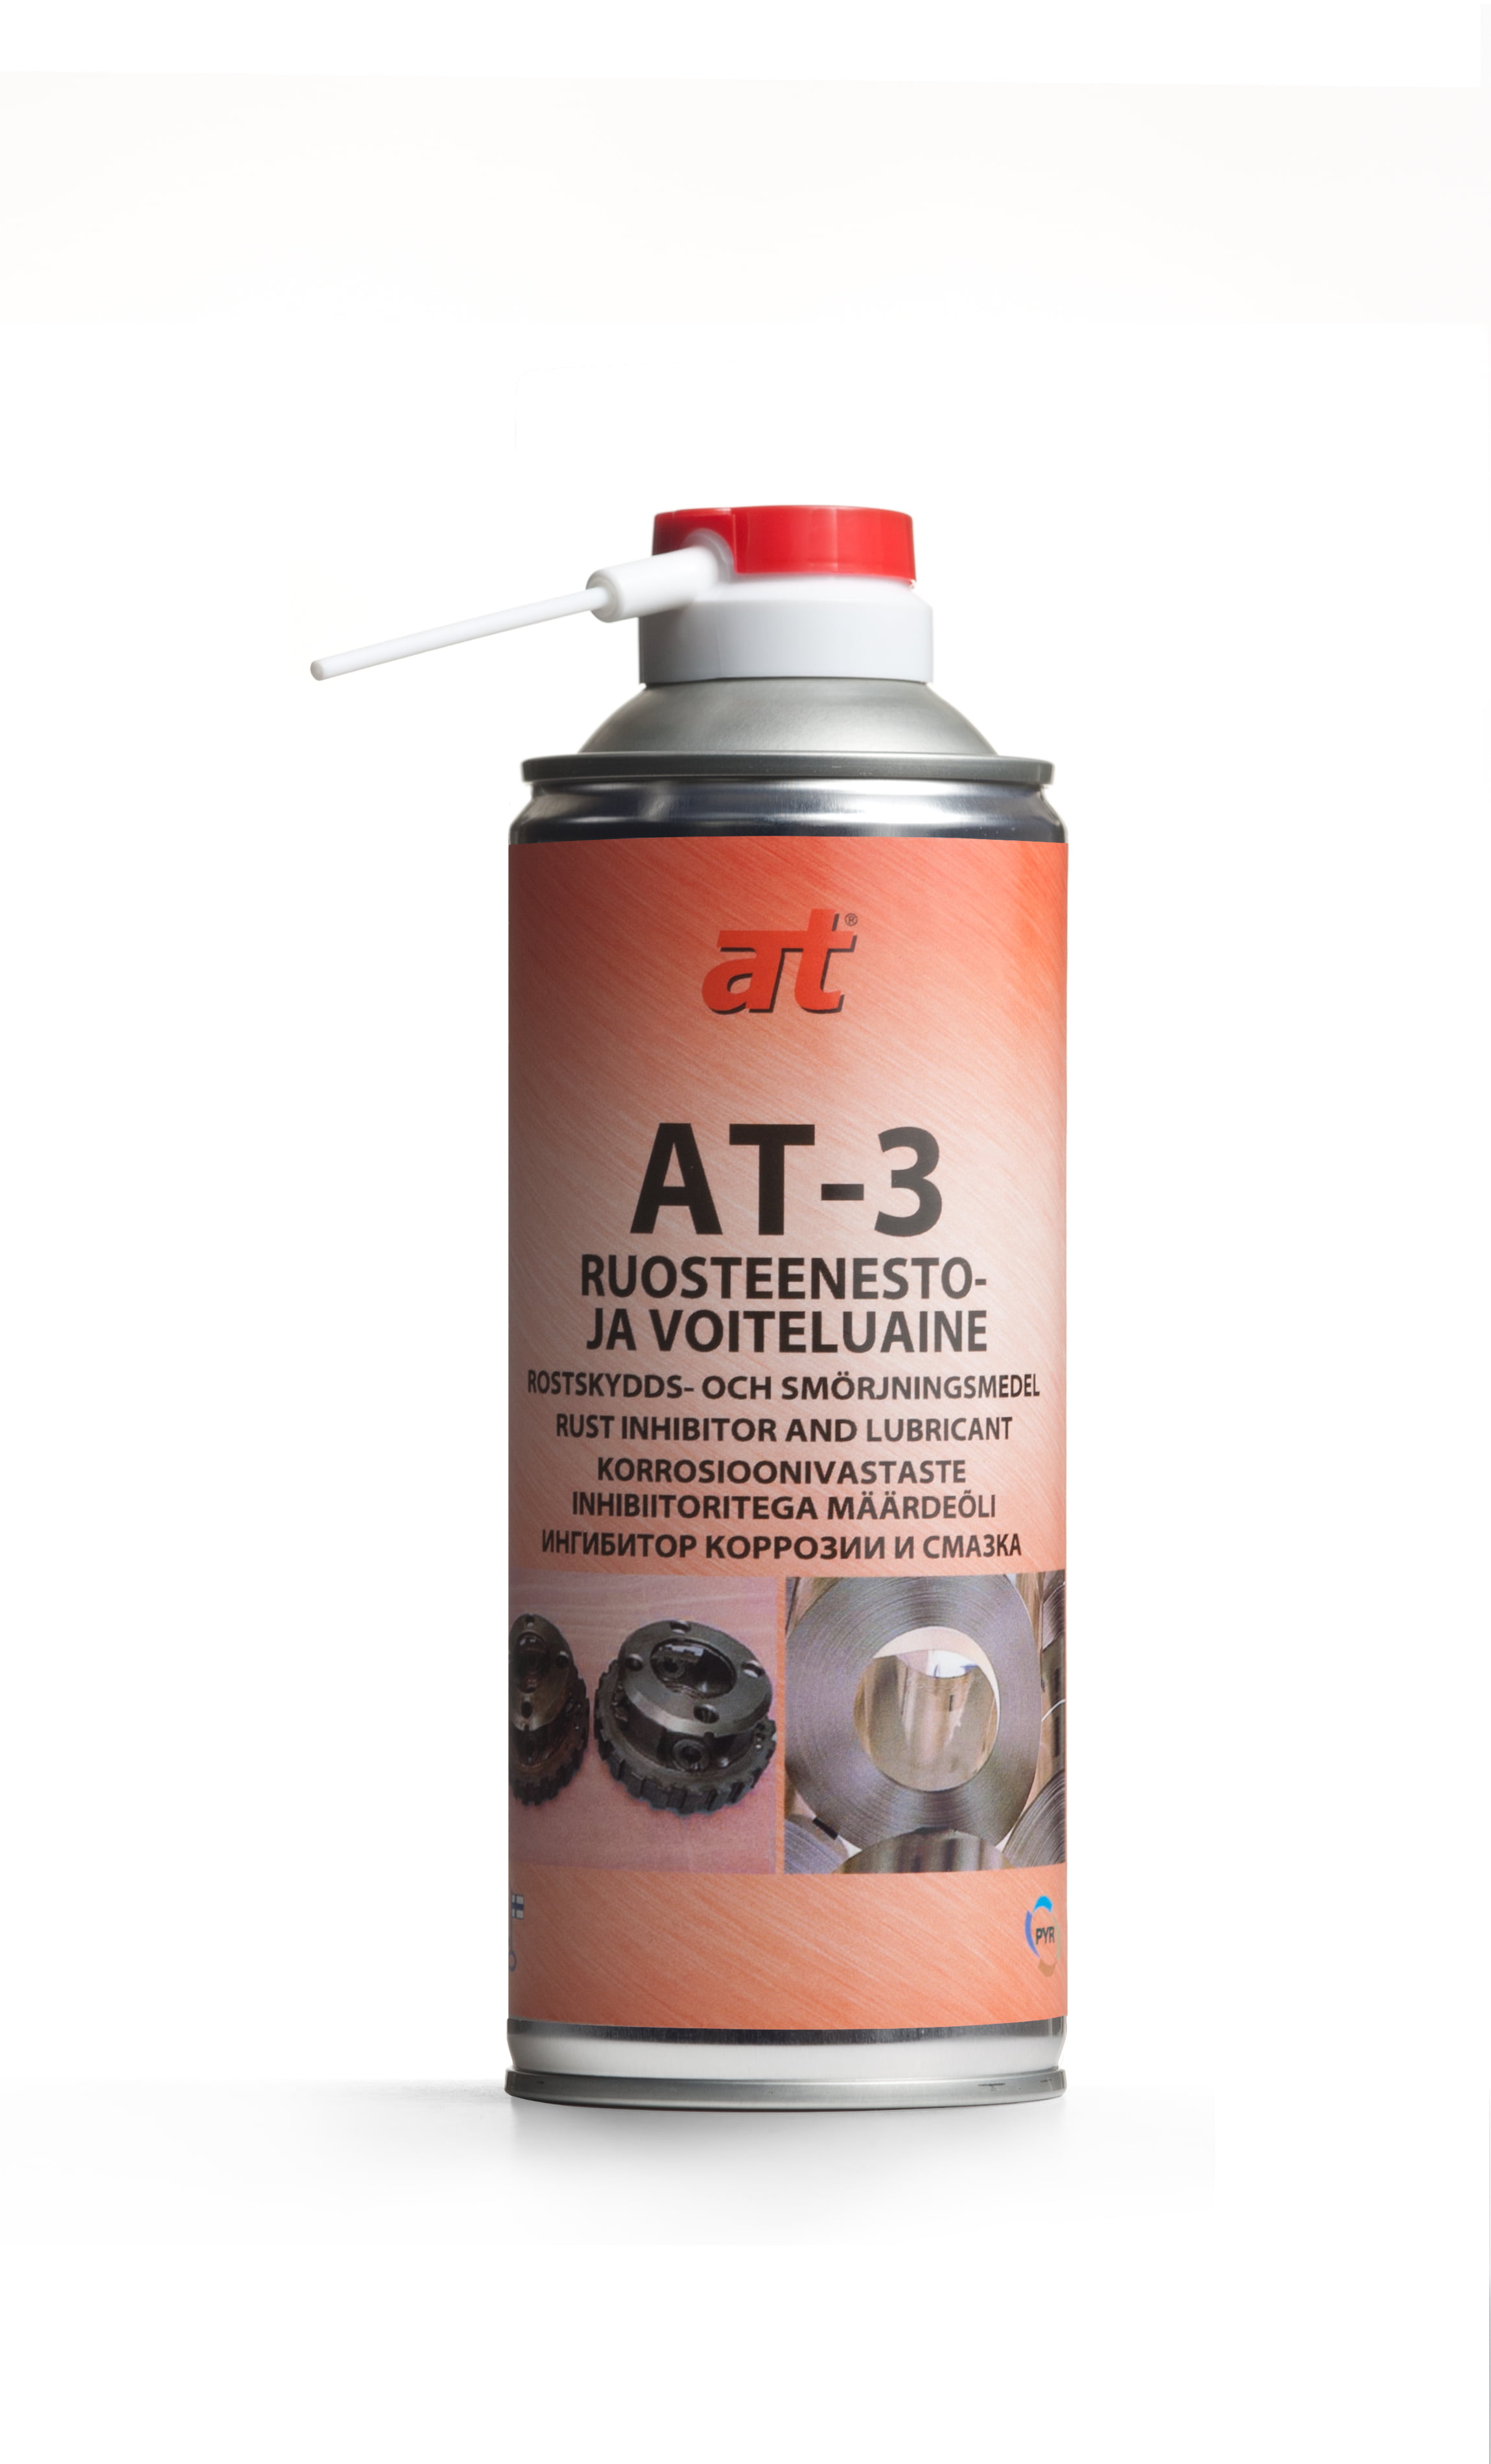 AT-3 RUST INHIBITOR AND LUBRICANT, 3000, 3010, 3015, 3020, 3030